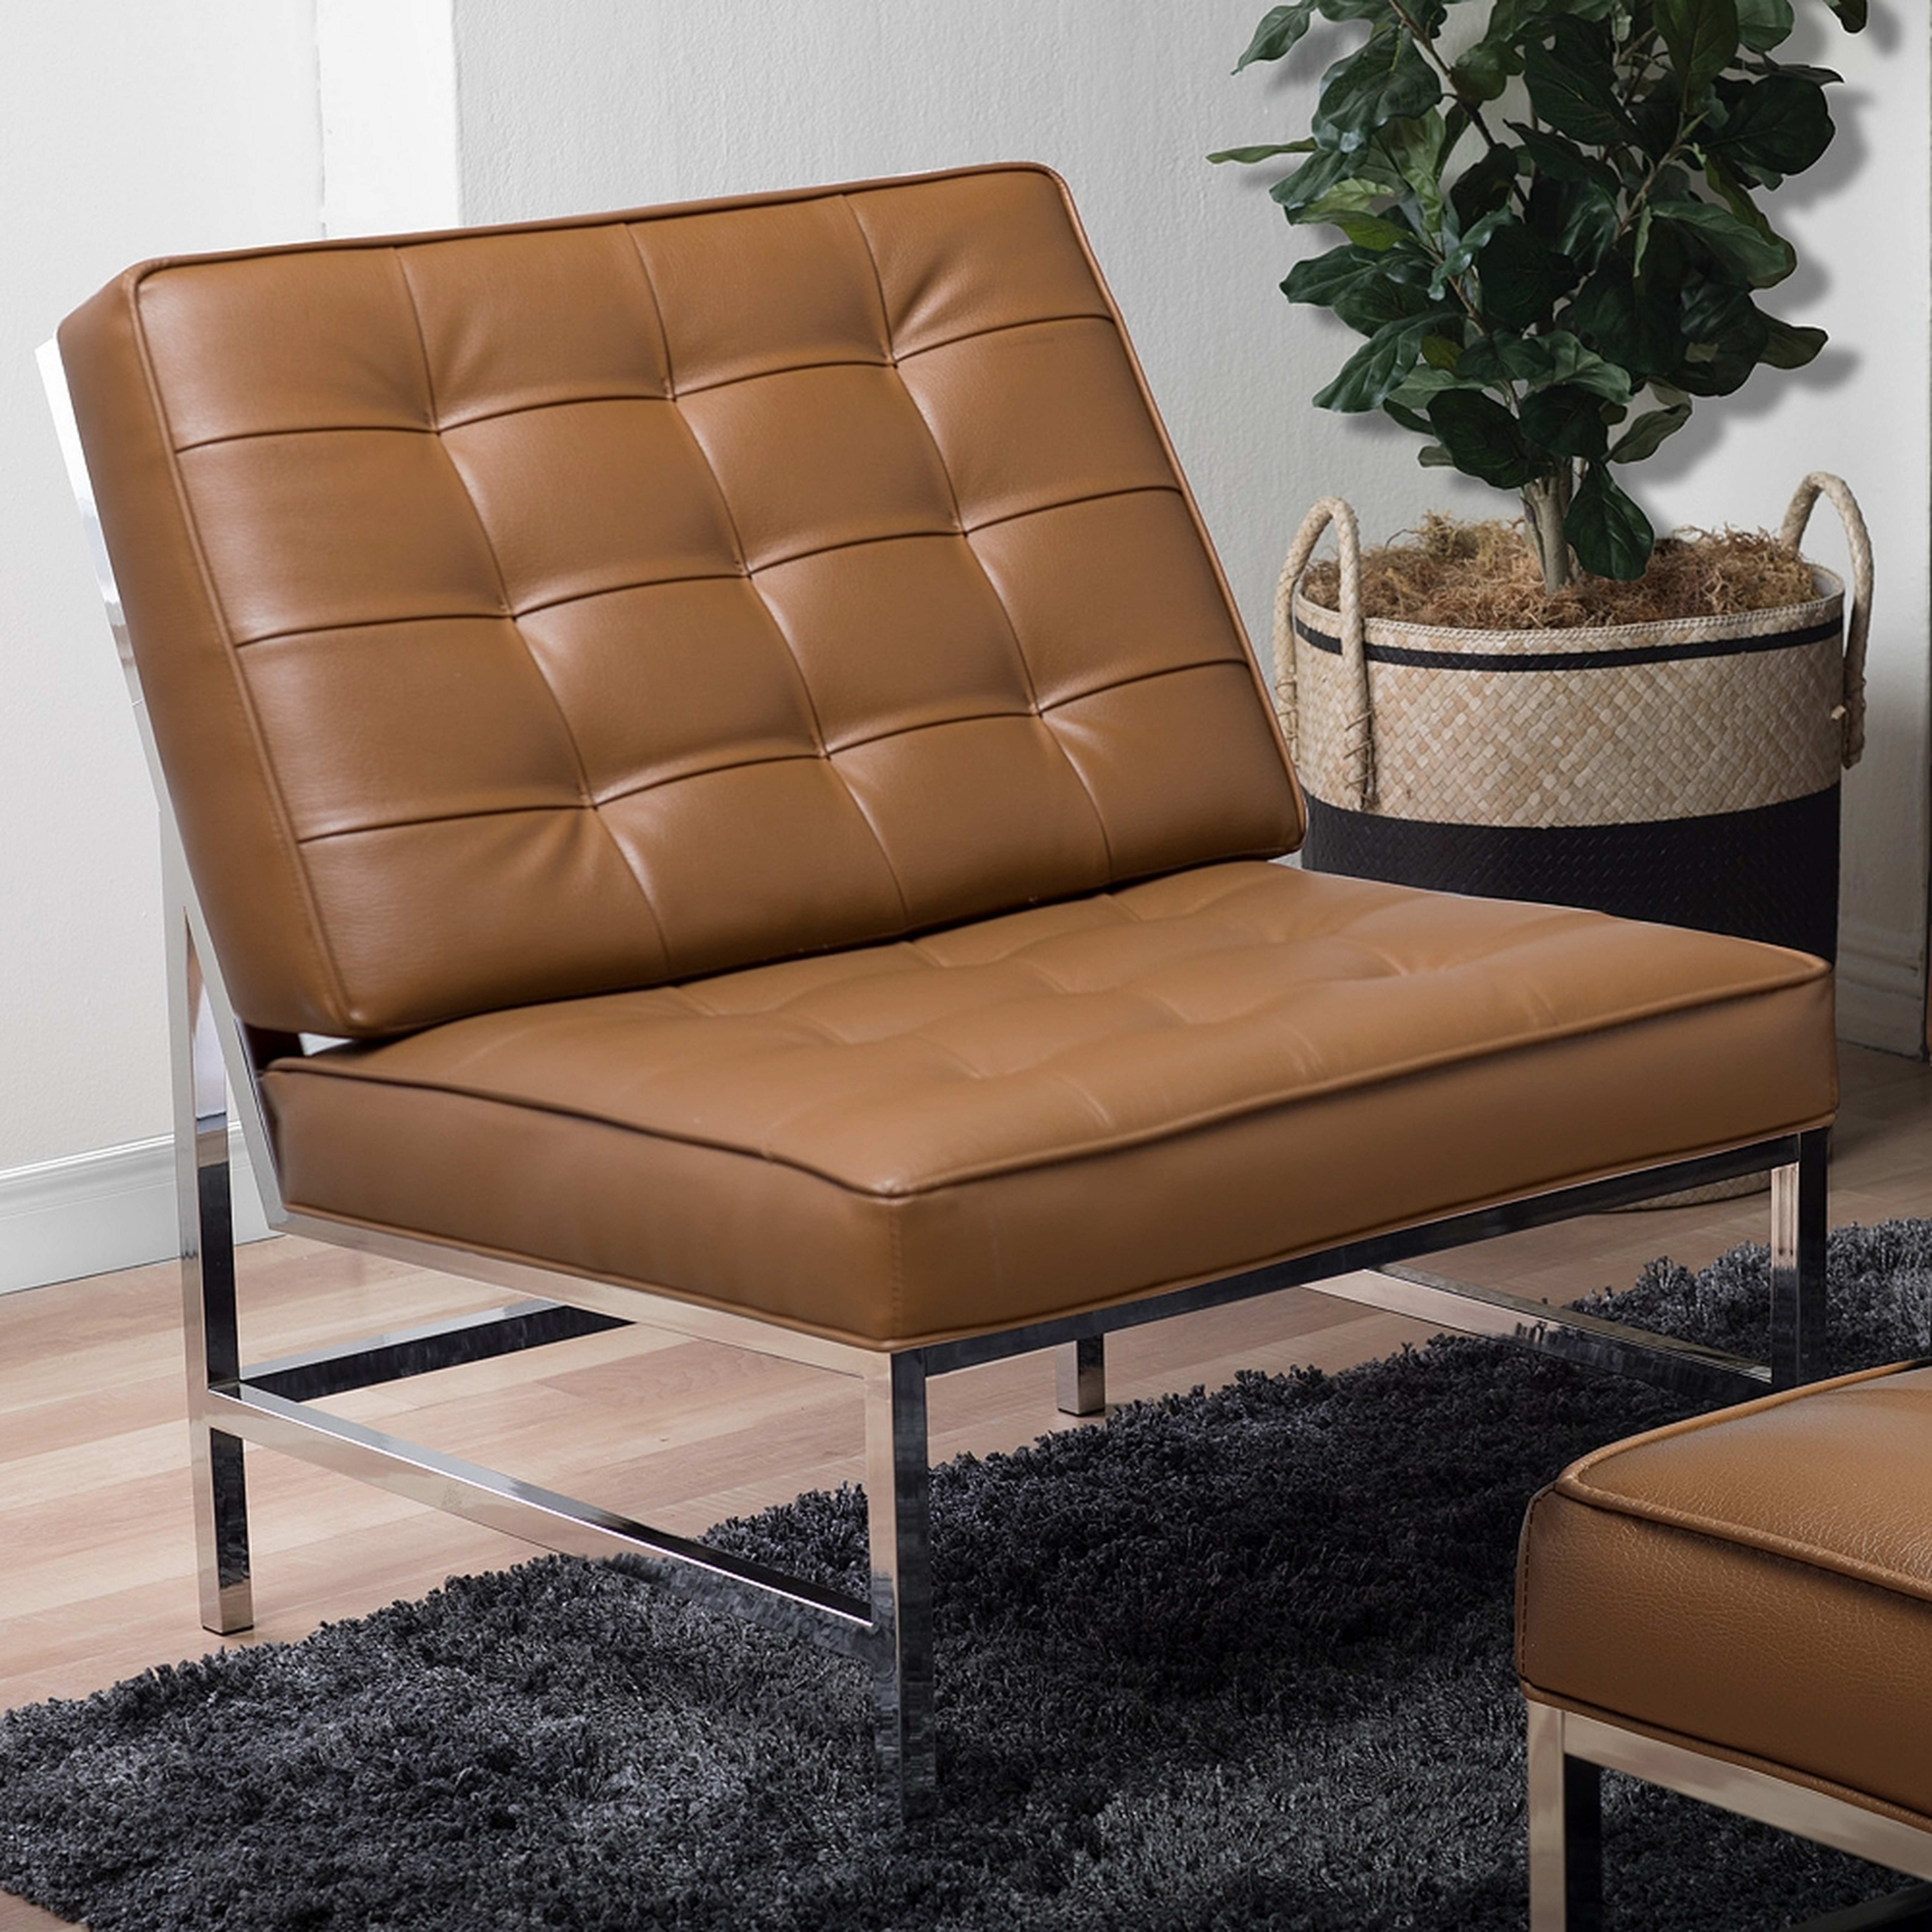 Ashlar Caramel Brown Bonded Leather Tufted Accent Chair - Style # 98R69 - Lamps Plus